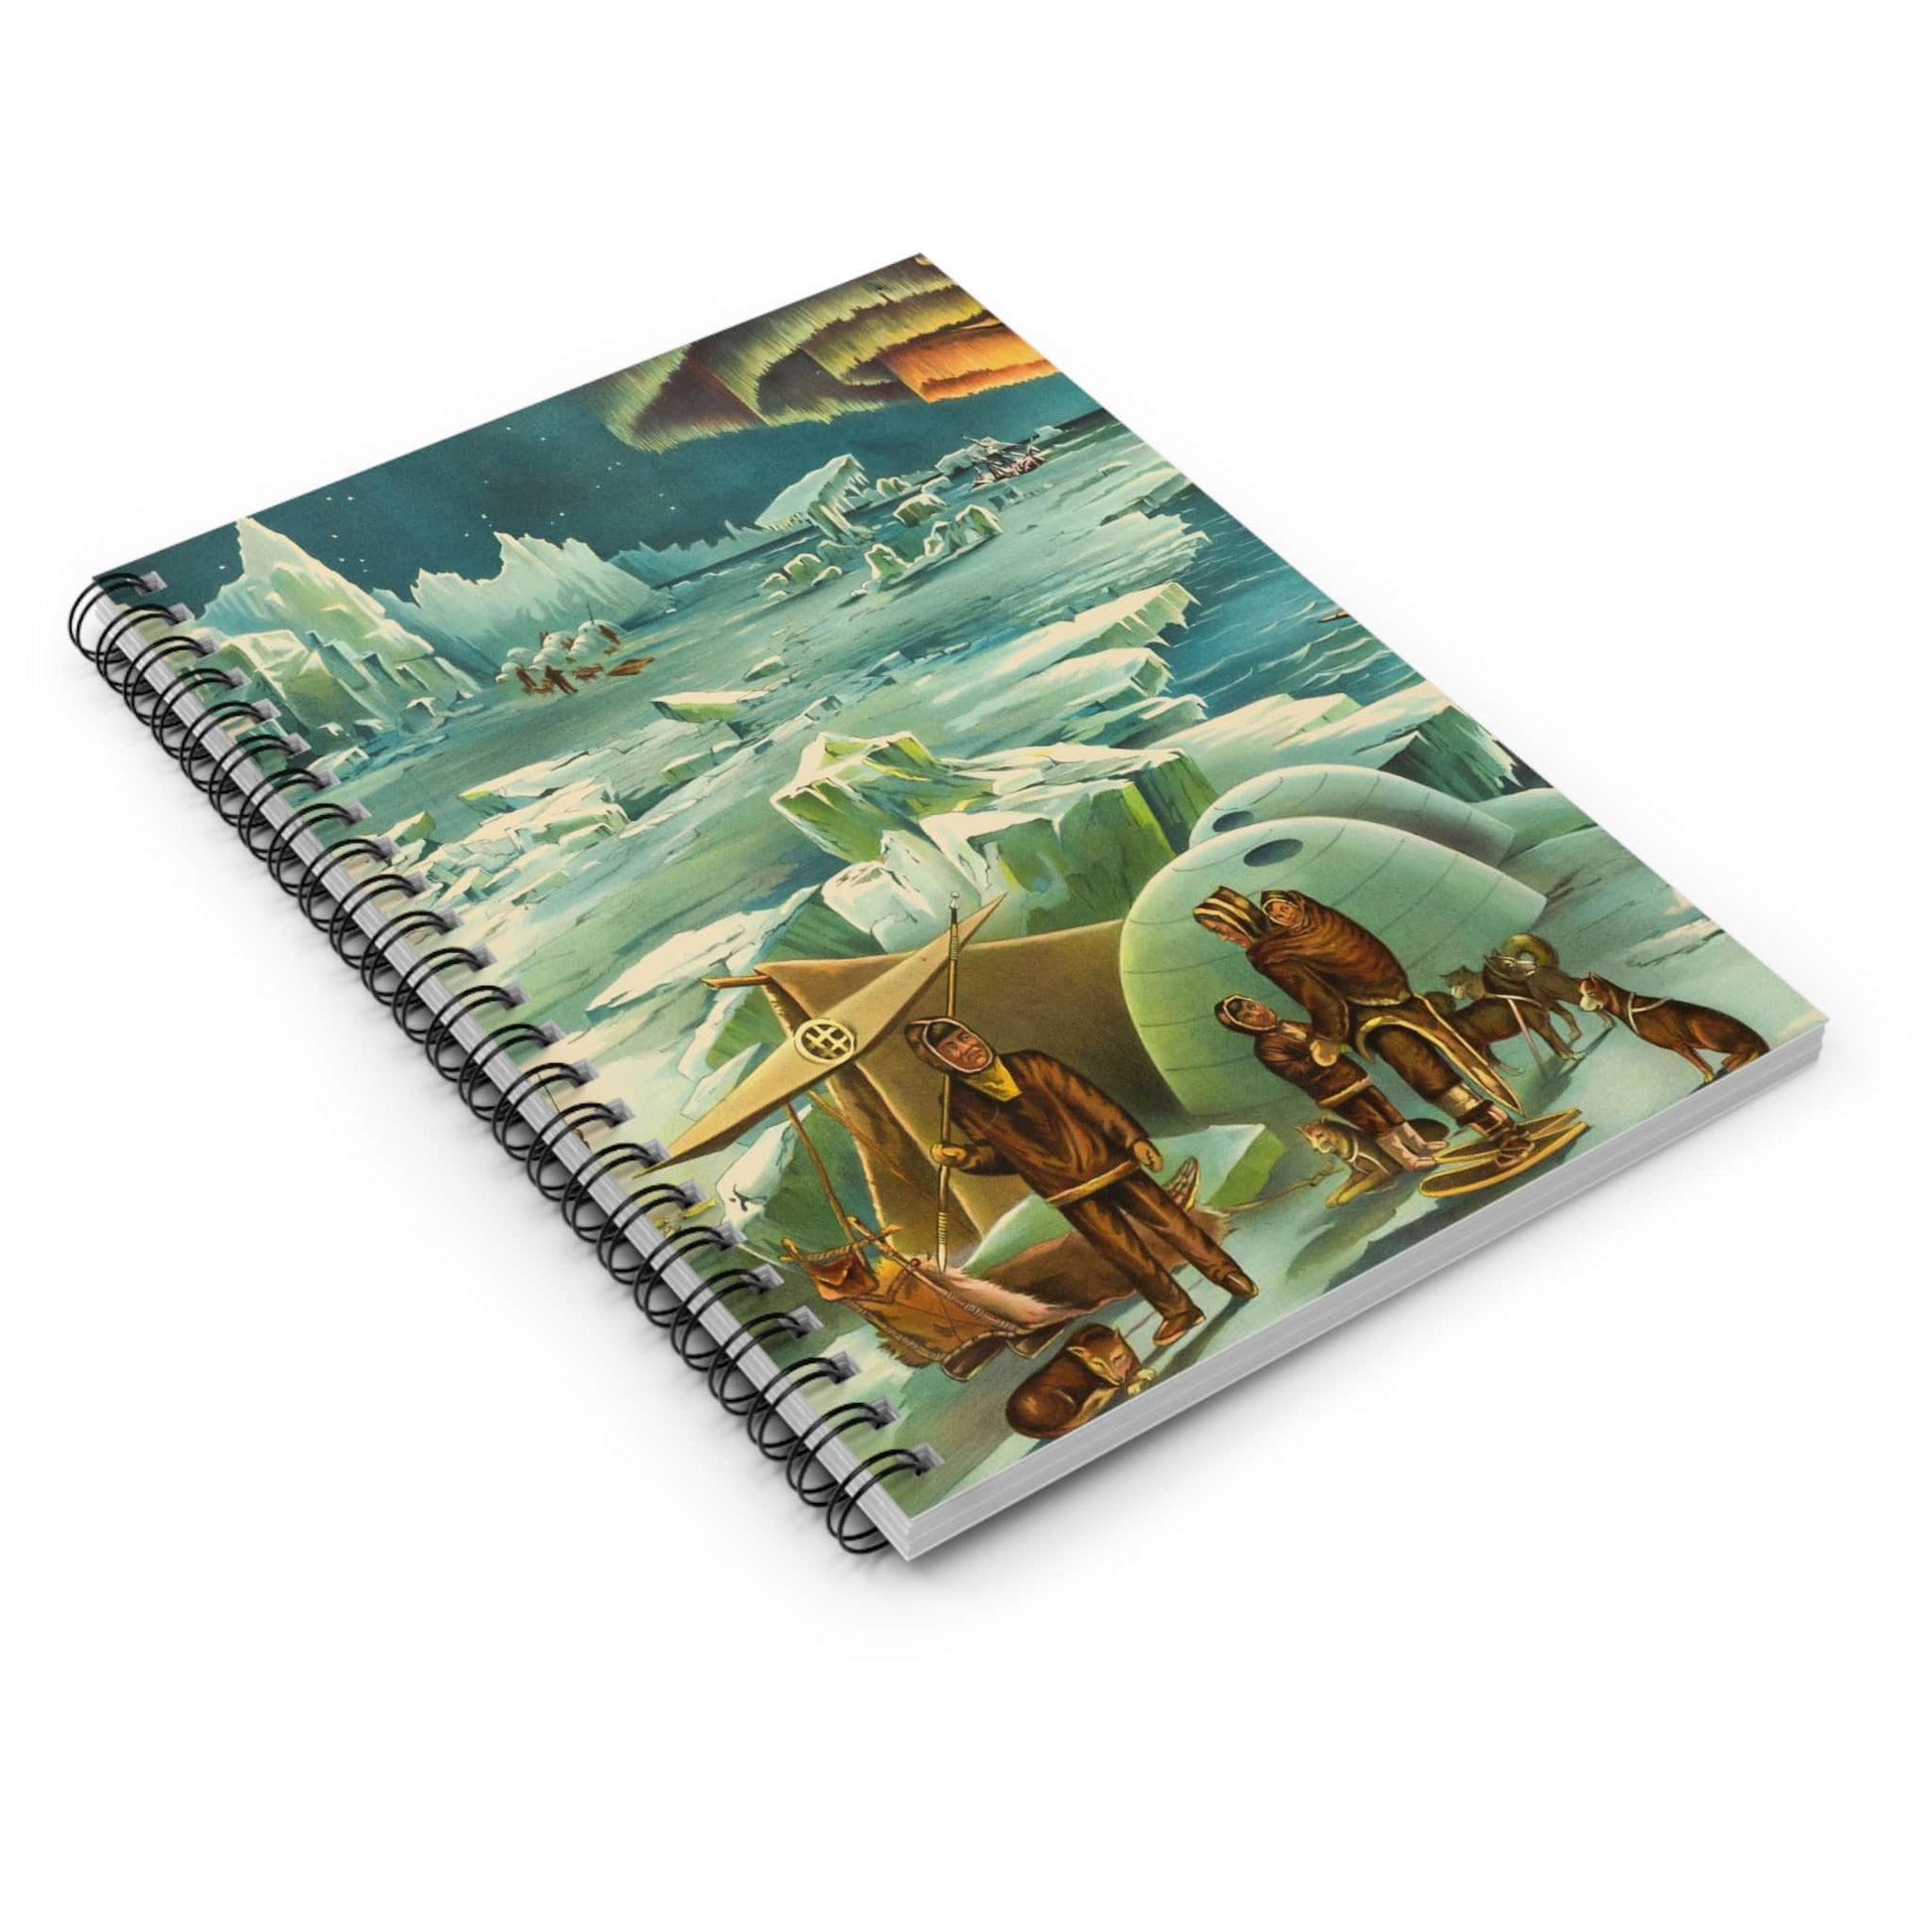 Polar Landscape Spiral Notebook Laying Flat on White Surface